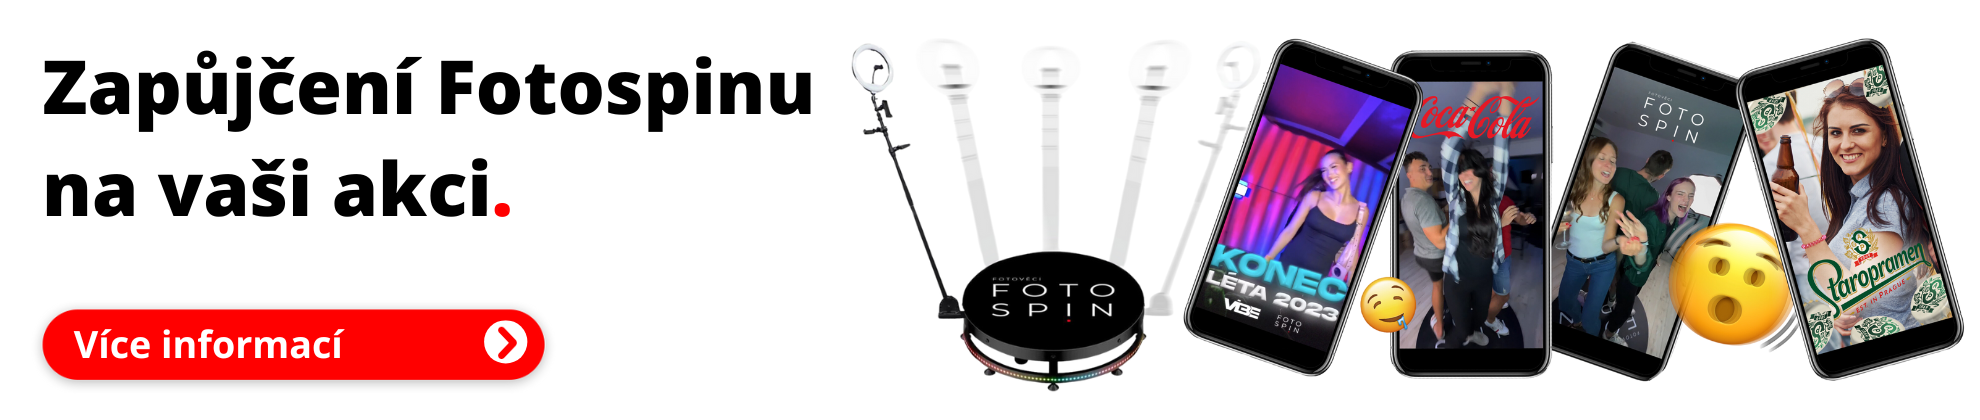 fotospin